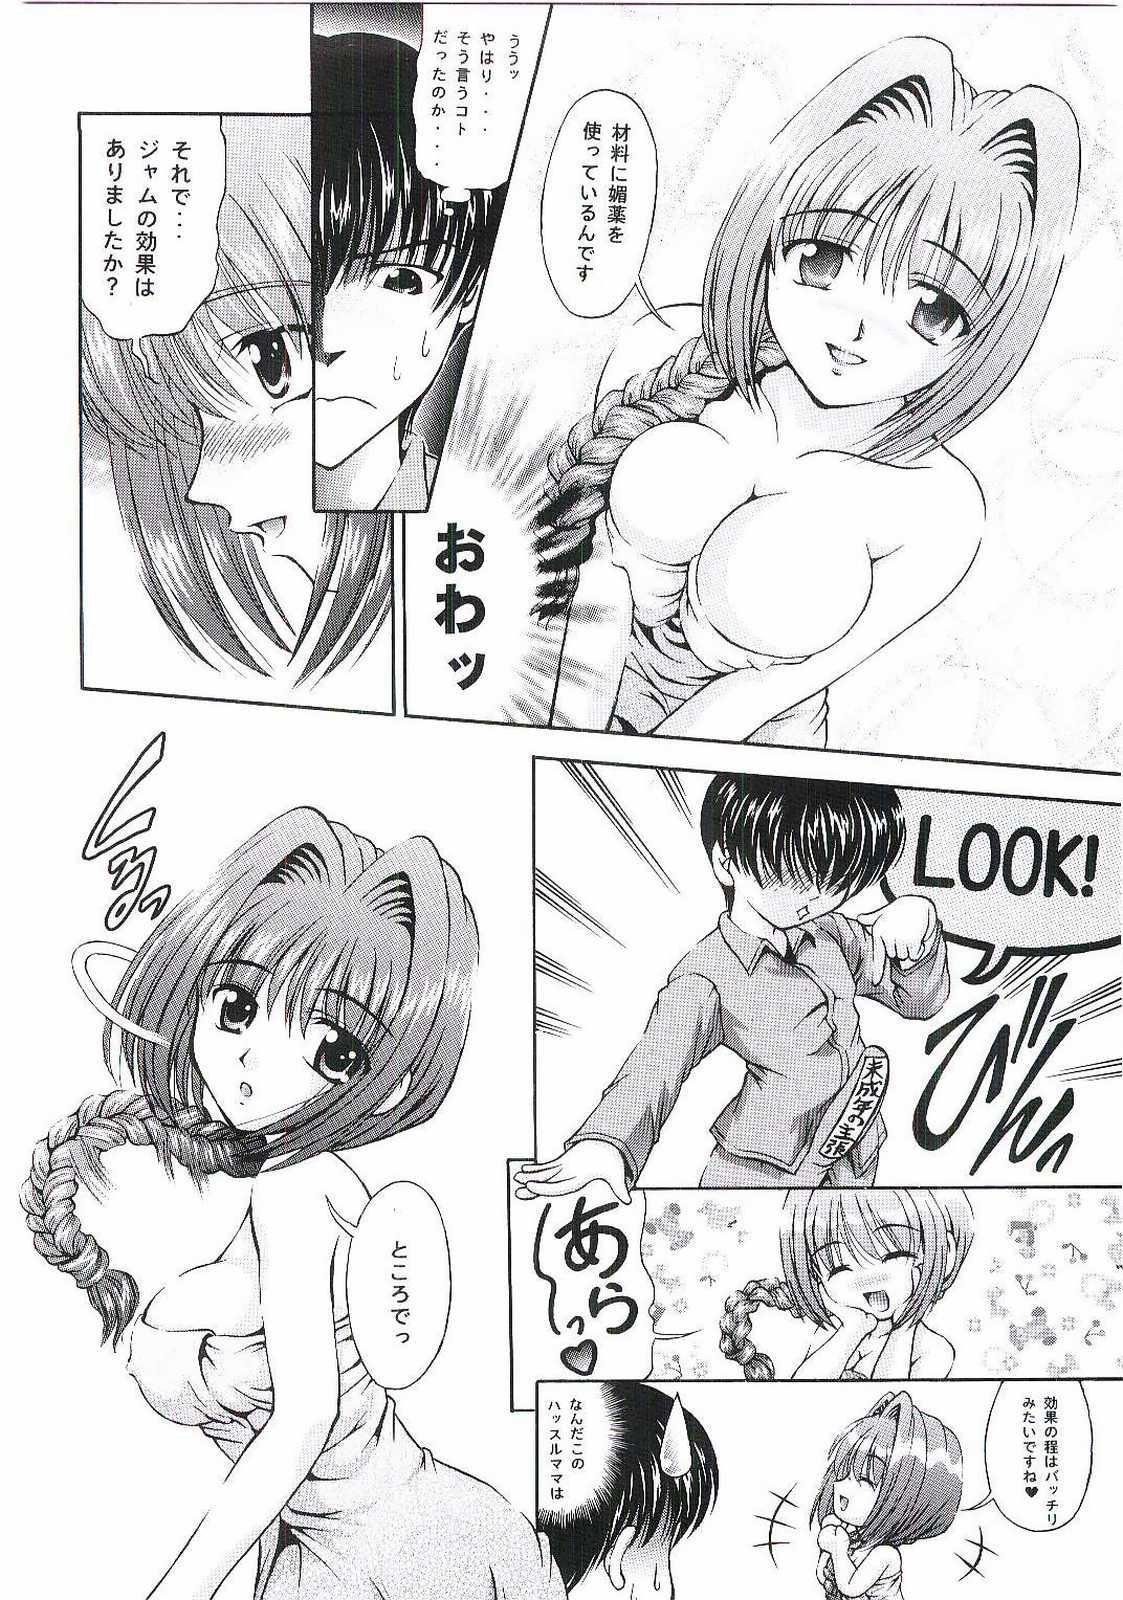 All Six Piece 1 - Kanon Women Sucking Dick - Page 7